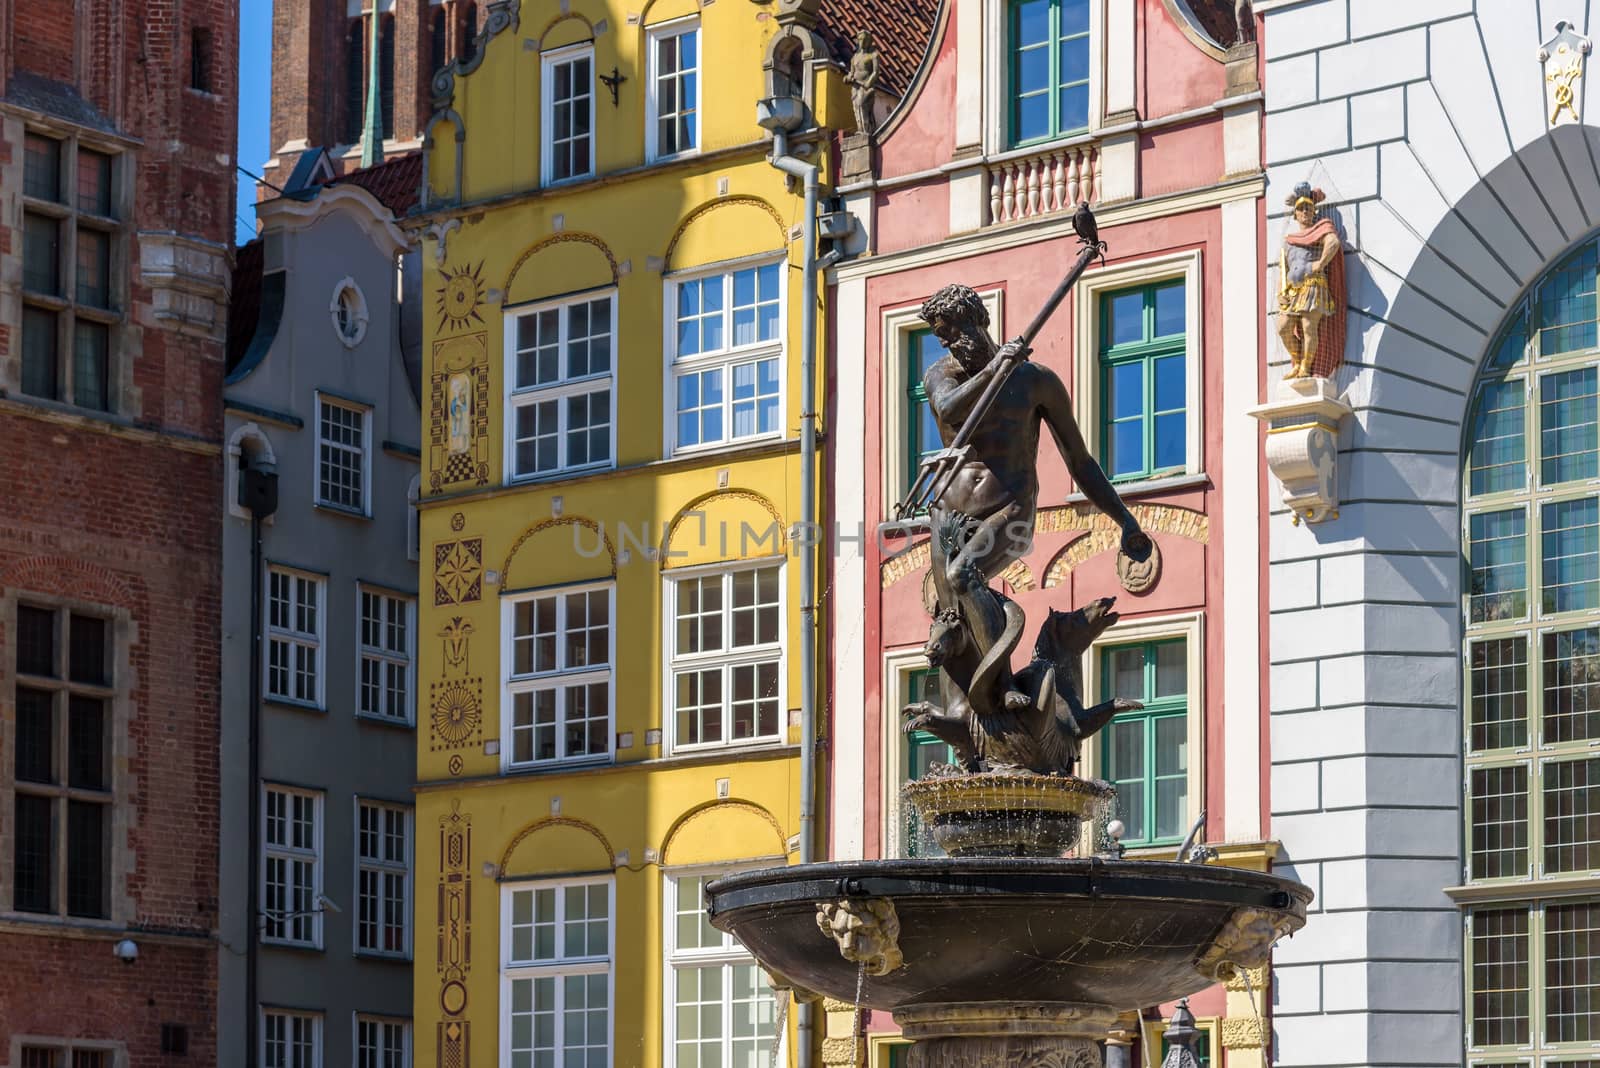 17th century Neptunes Fountain in Gdansk, one of the most distinctive landmarks of the city